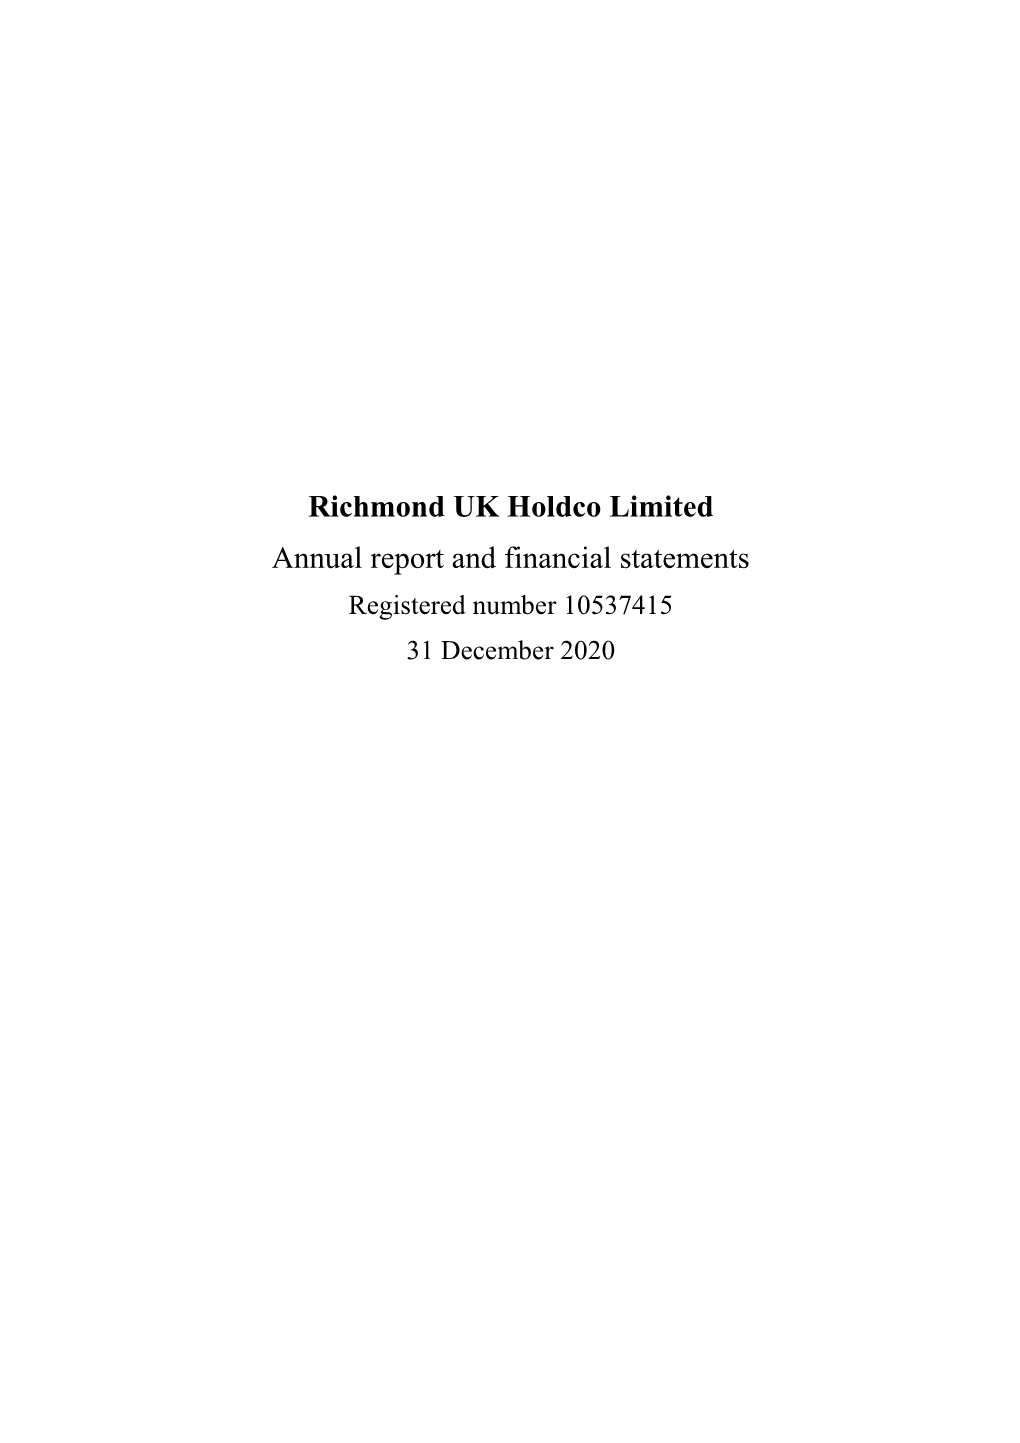 Richmond UK Holdco Limited Annual Report and Financial Statements Registered Number 10537415 31 December 2020